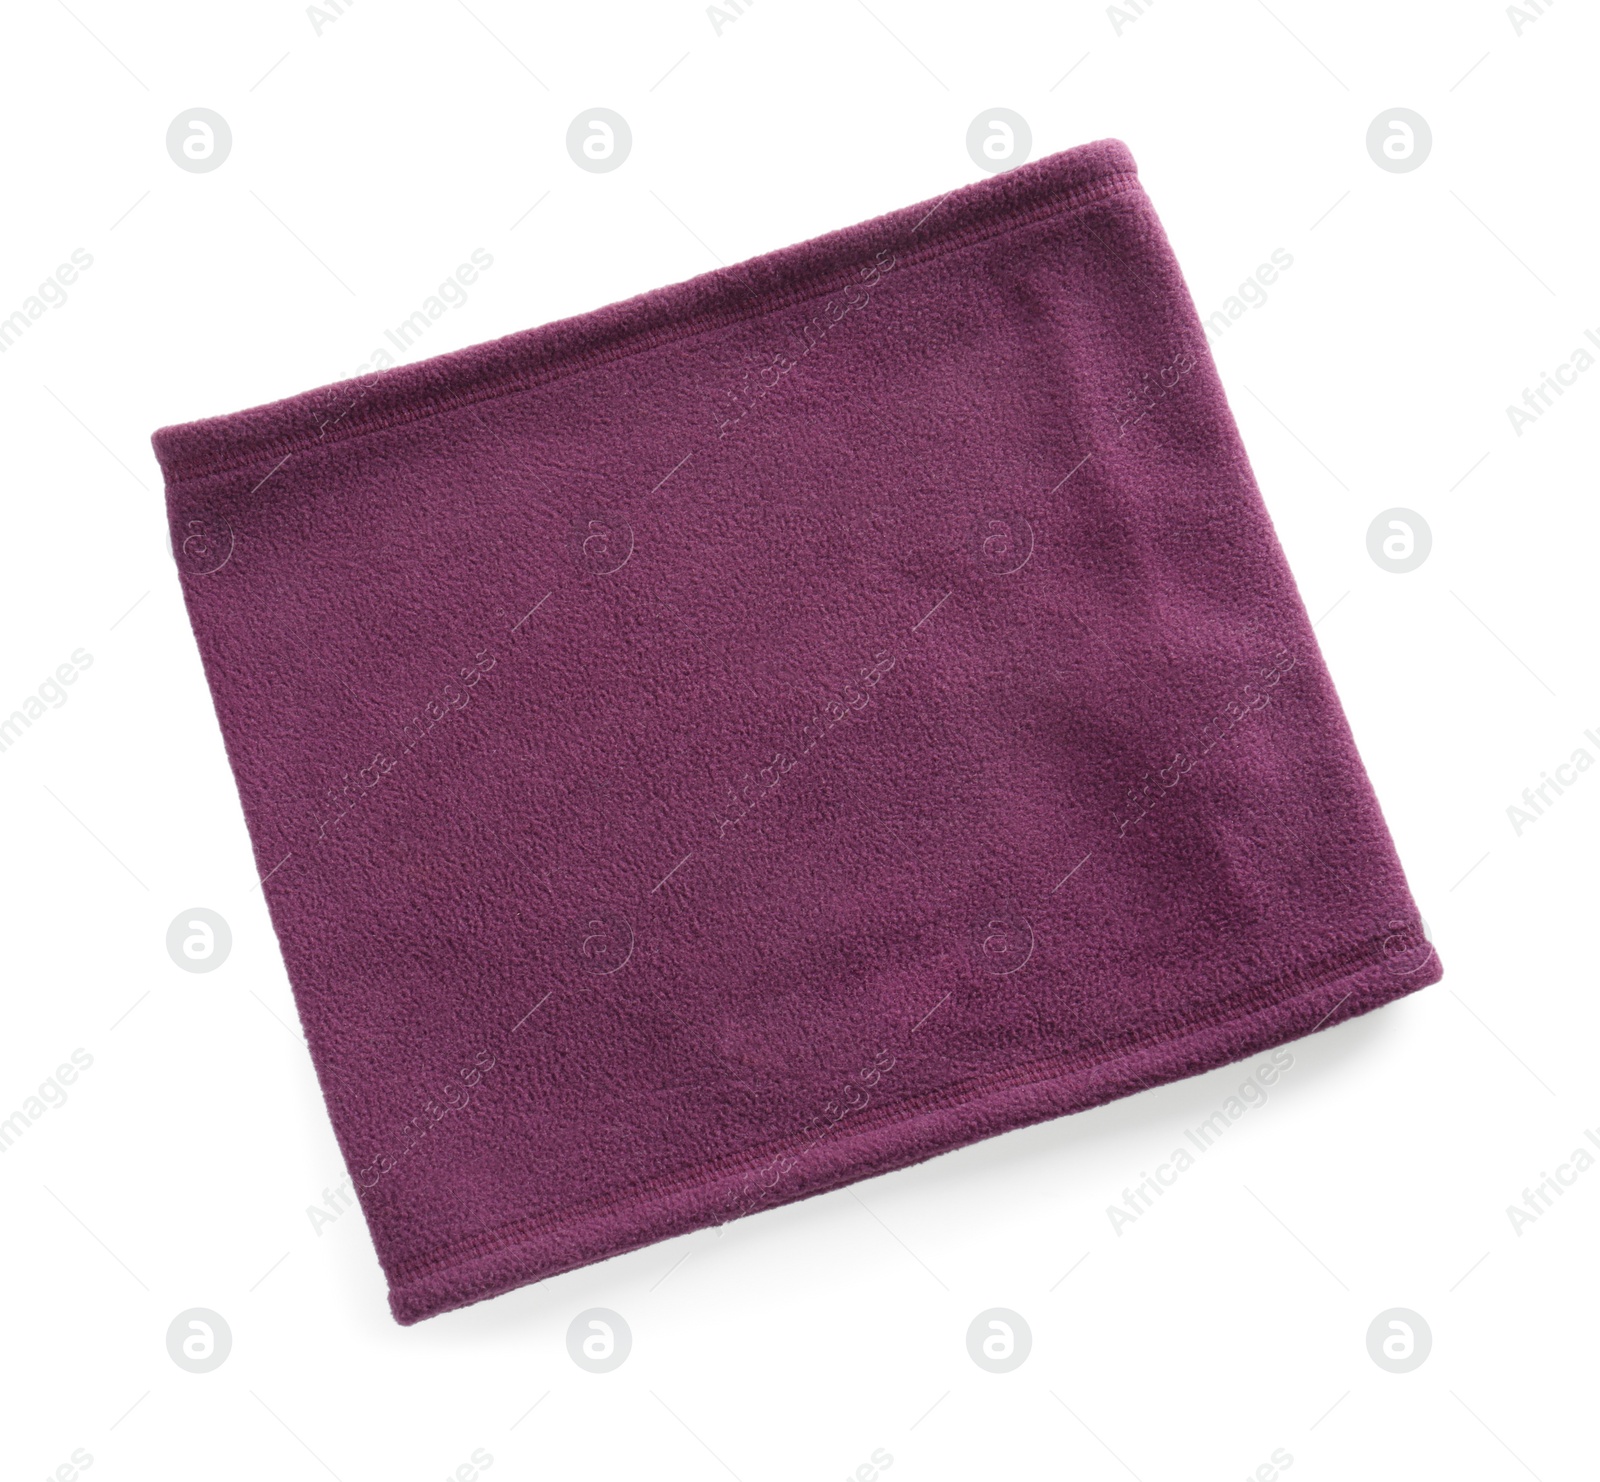 Photo of Soft purple neckwarmer isolated on white, top view. Winter sports clothes